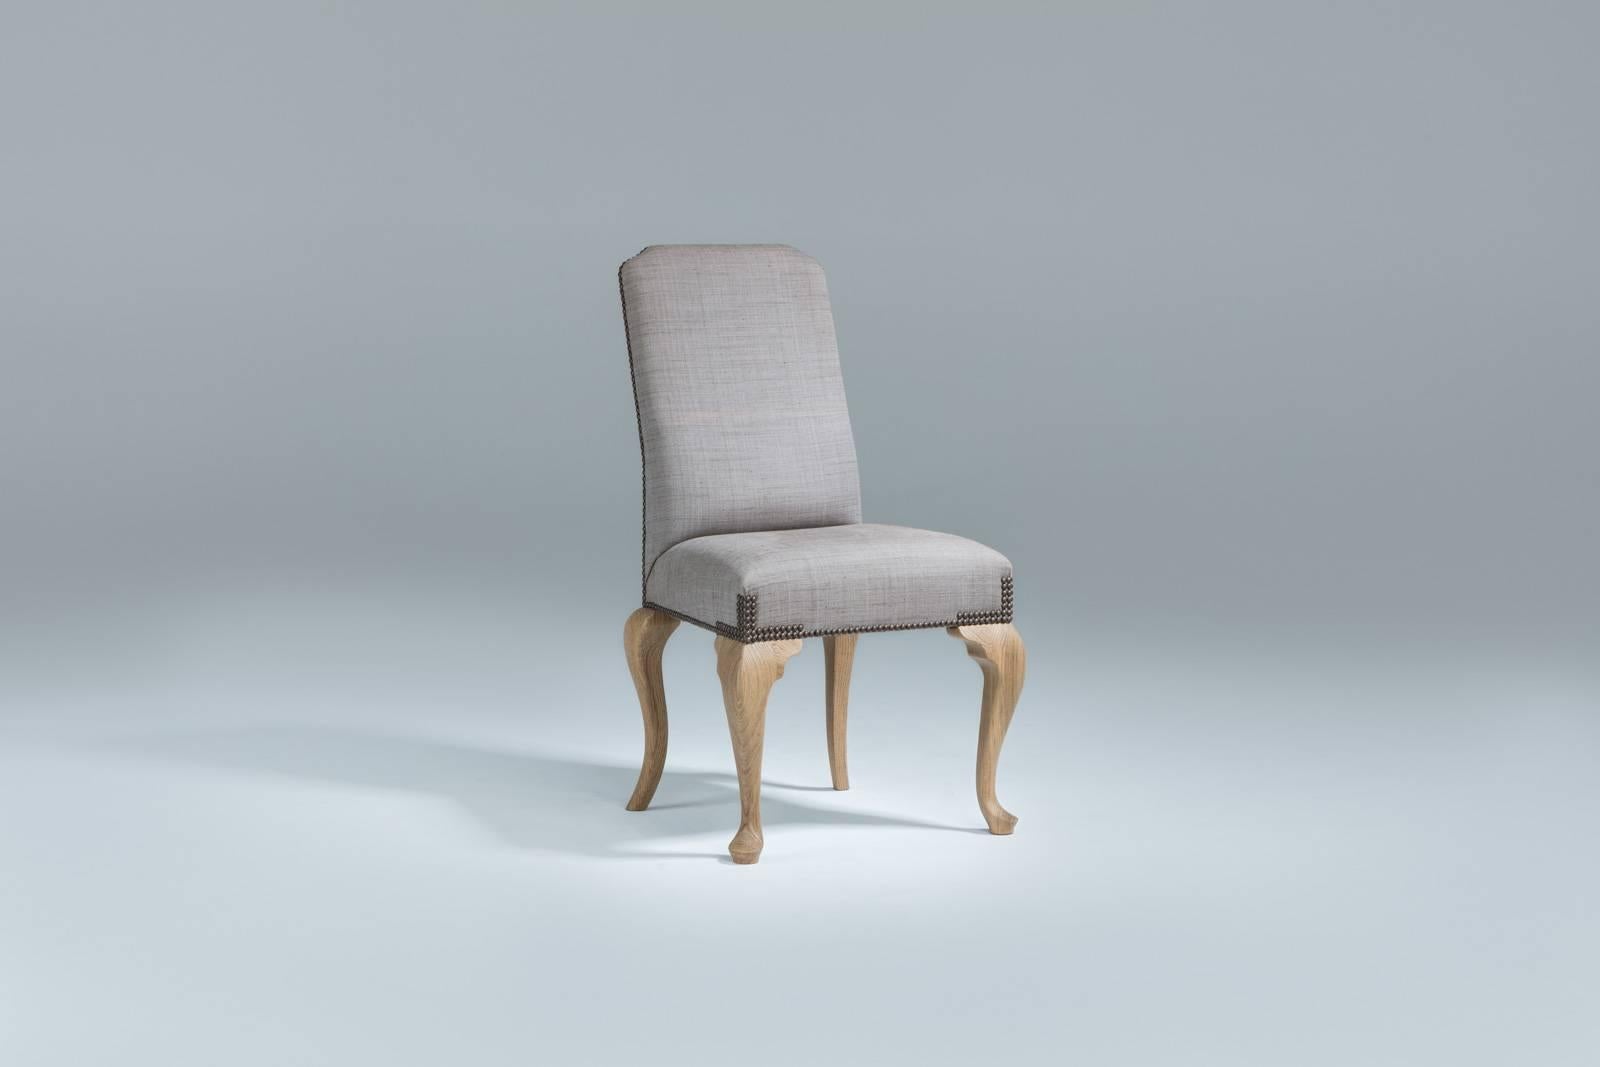 with front cabriole legs. Made to order in 6-8 weeks. Price per chair £1100 plus 2-2.5 metres of fabric.